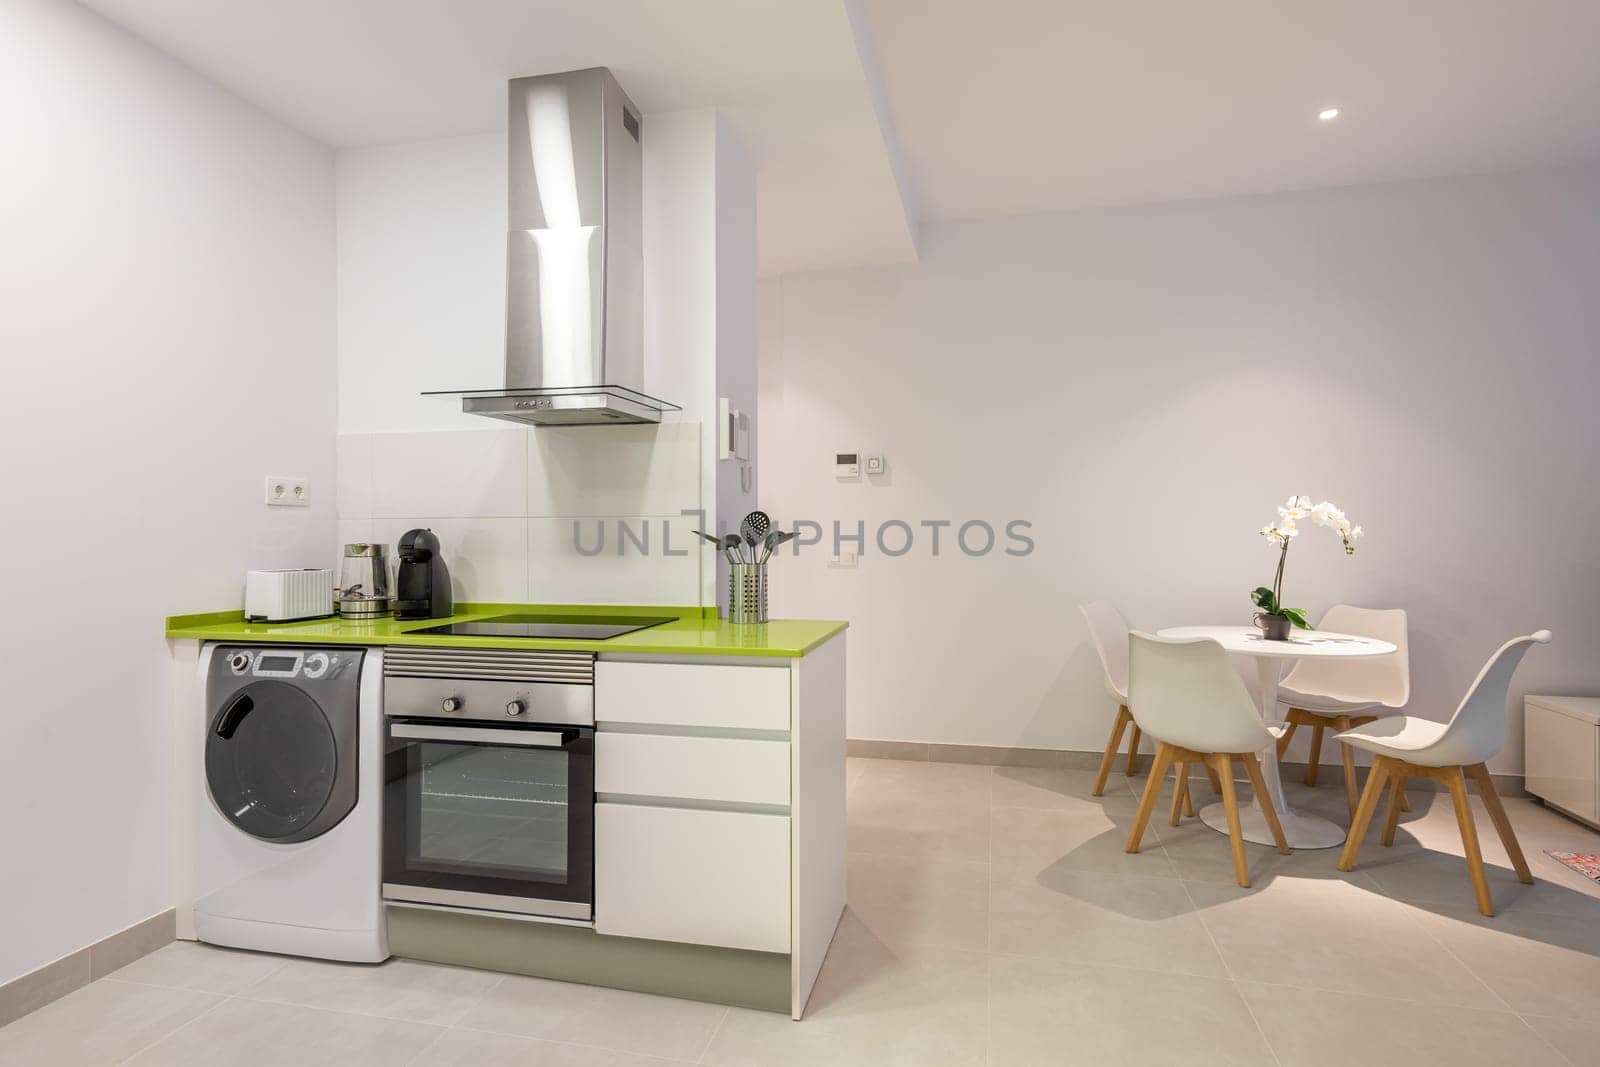 Horizontal shot stylish green and white kitchen with high-tech appliances and modern furniture. Young small family kitchen concept.